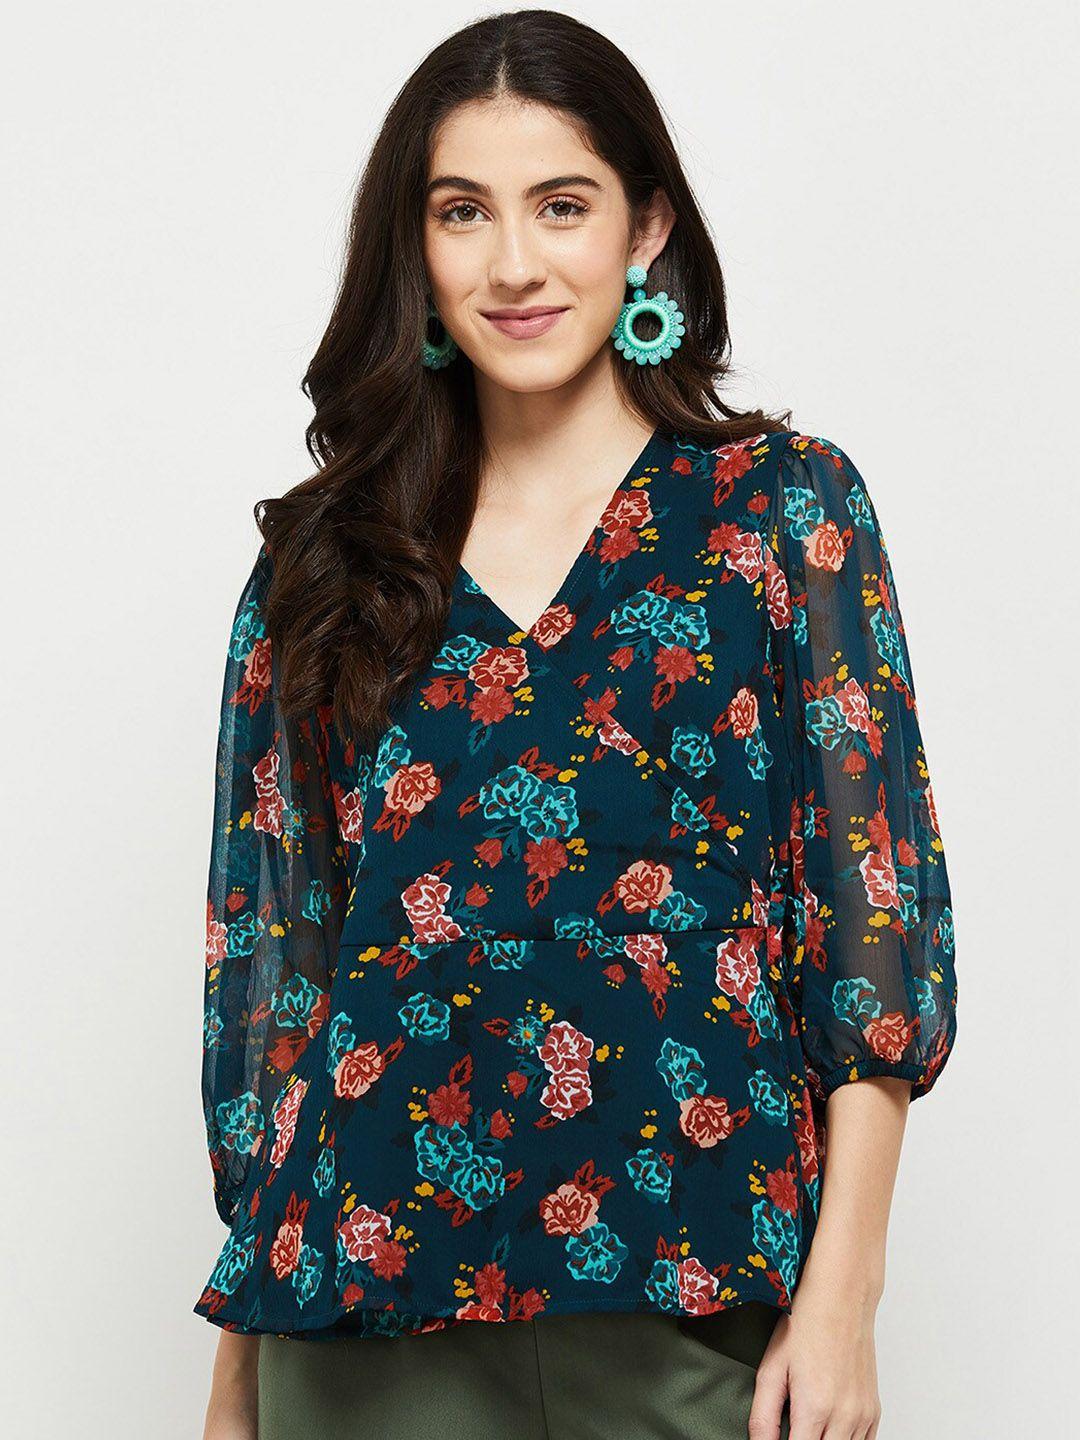 max-women-teal-blue-&-red-floral-print-wrap-top